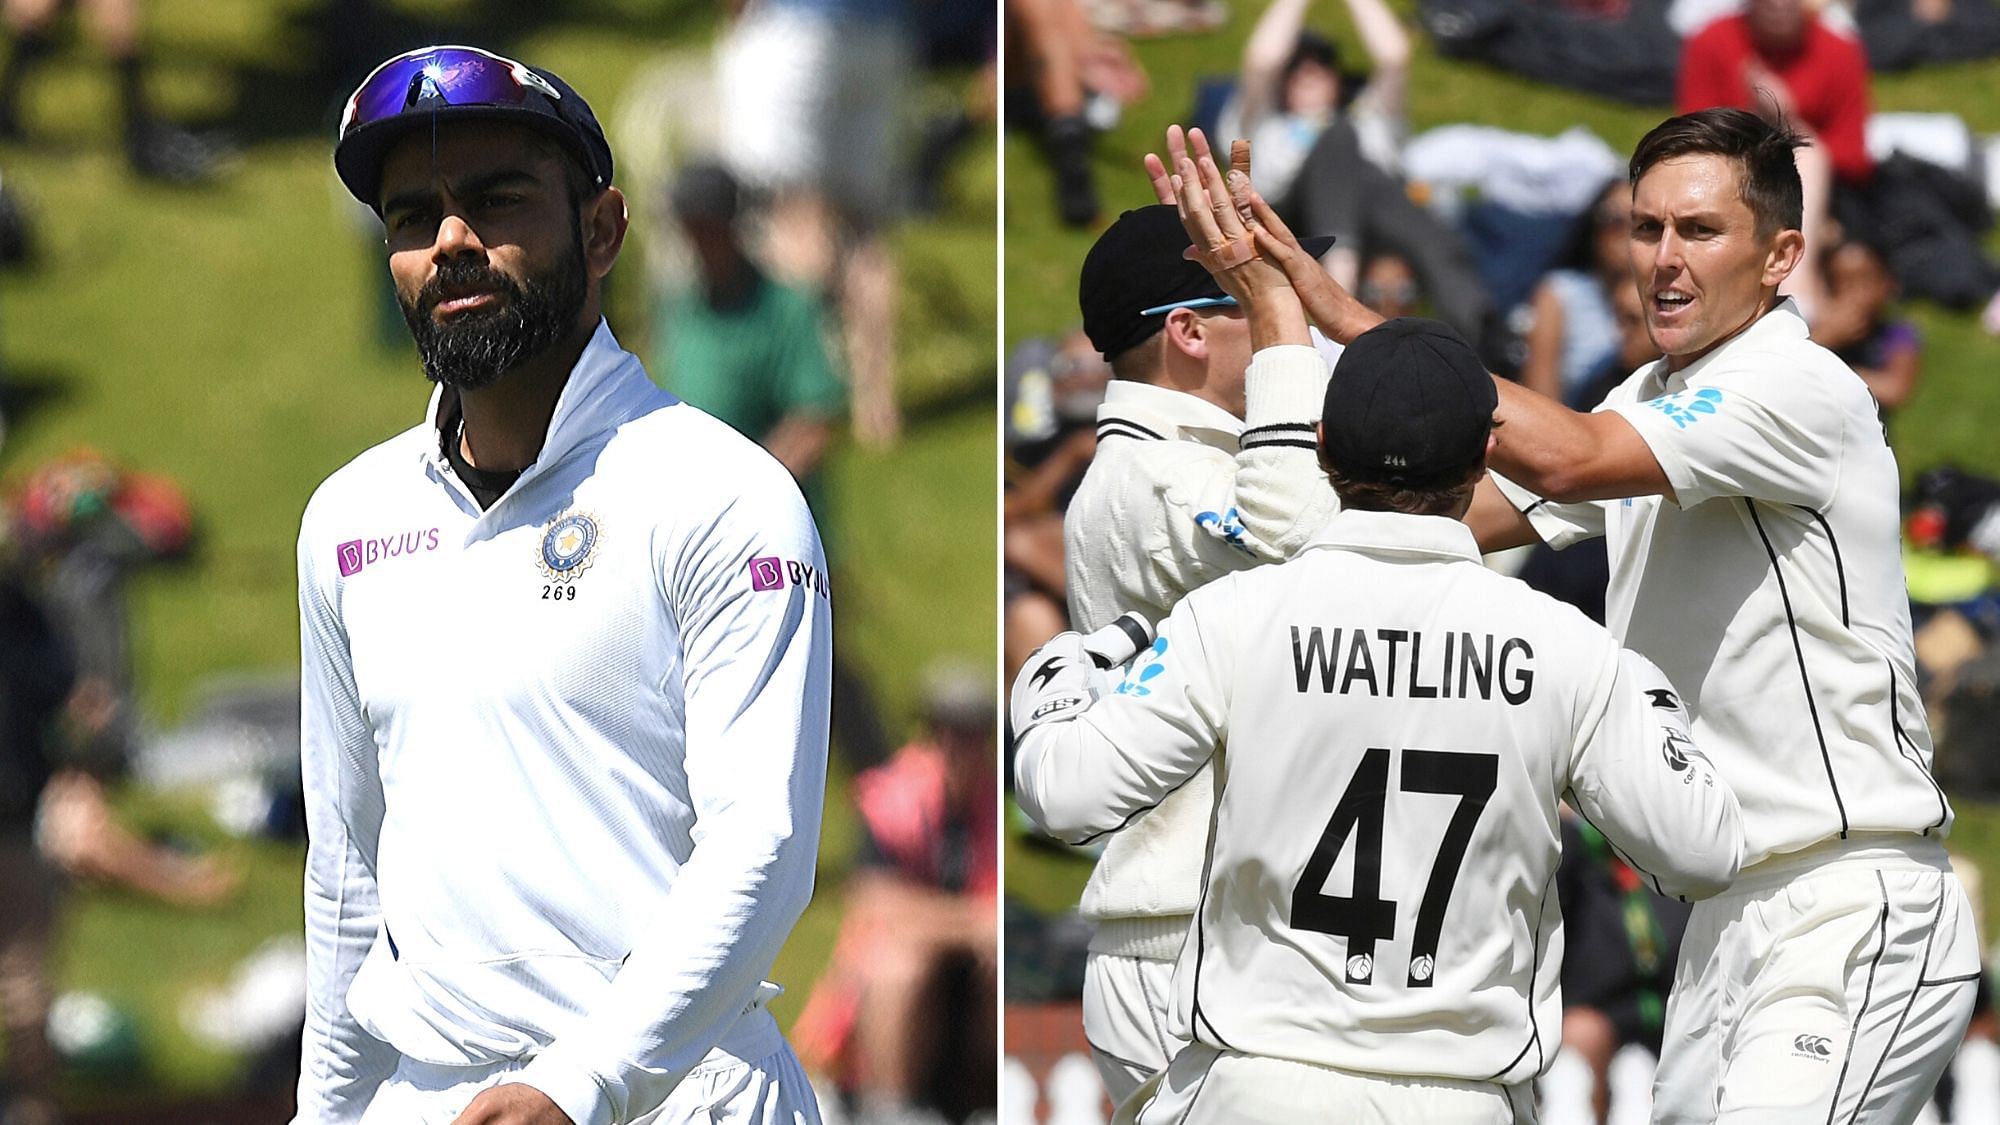 New Zealand defeated India by 10 wickets in the first Test in Wellington to take a 1-0 lead in the two-match series.